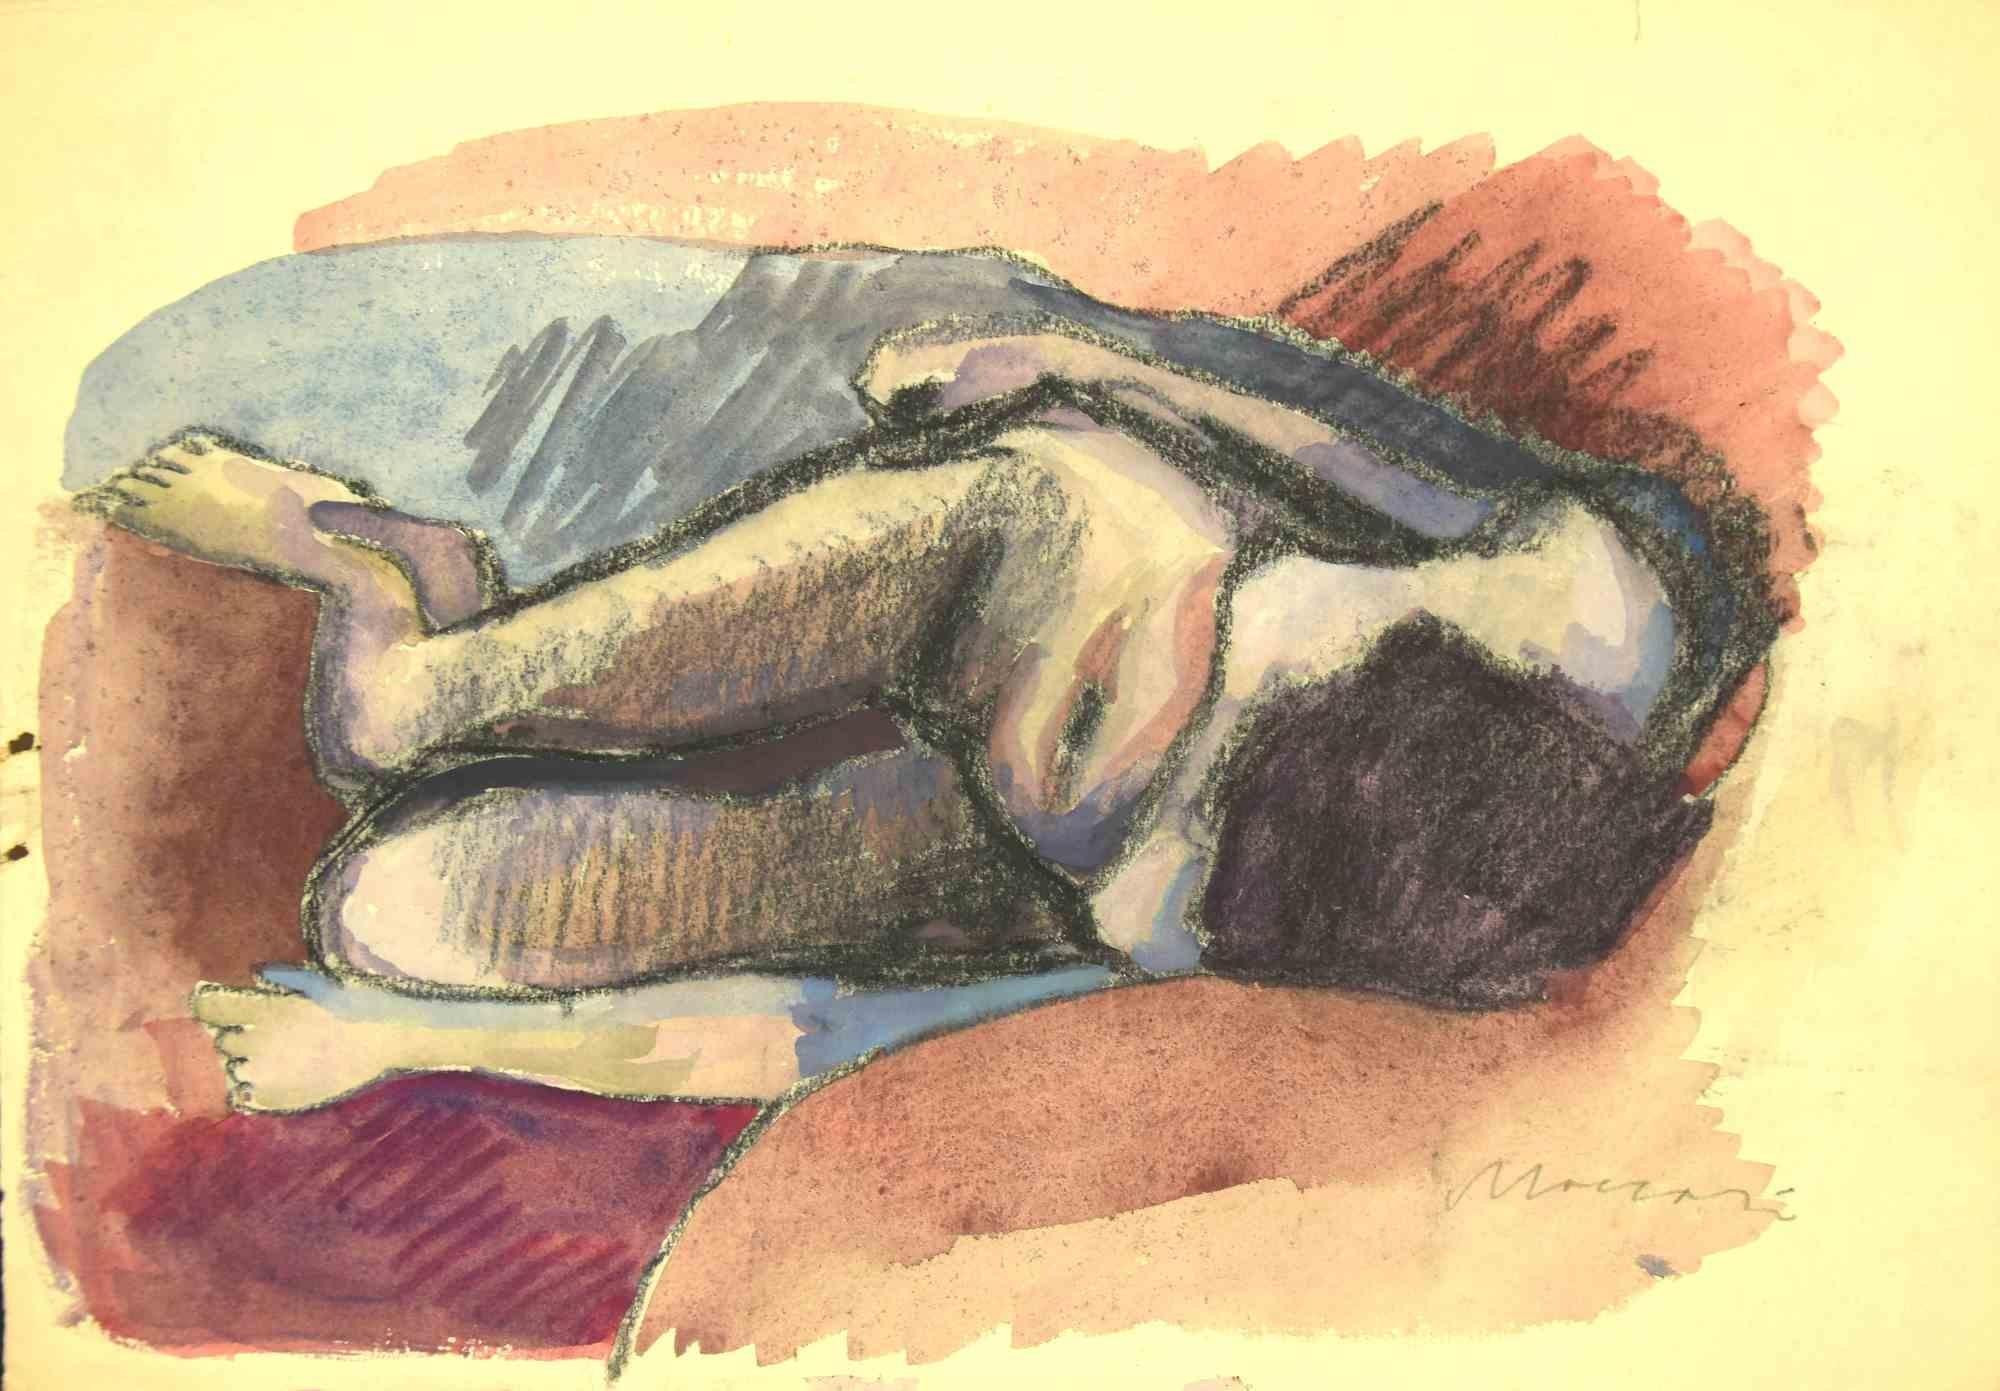 Reclined Nude - Drawing by Mino Maccari - Mid 20th Century